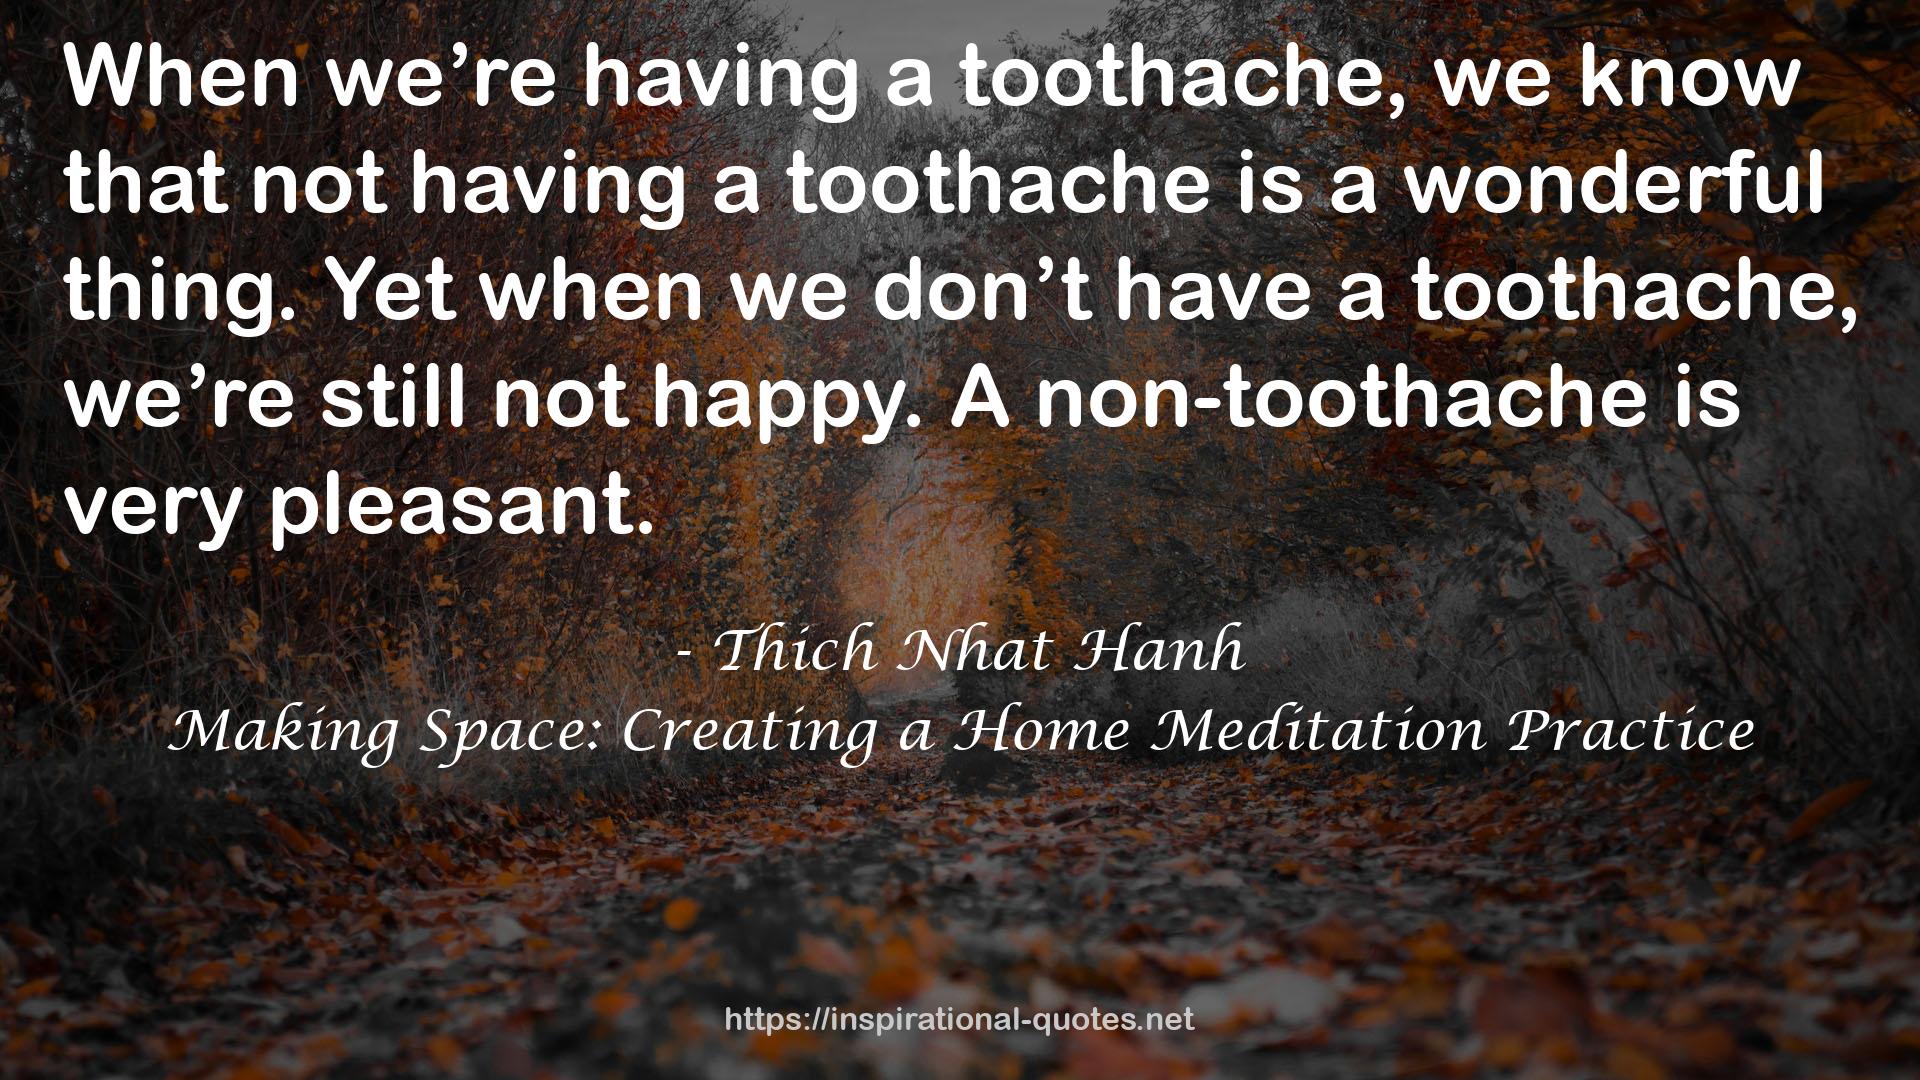 Making Space: Creating a Home Meditation Practice QUOTES